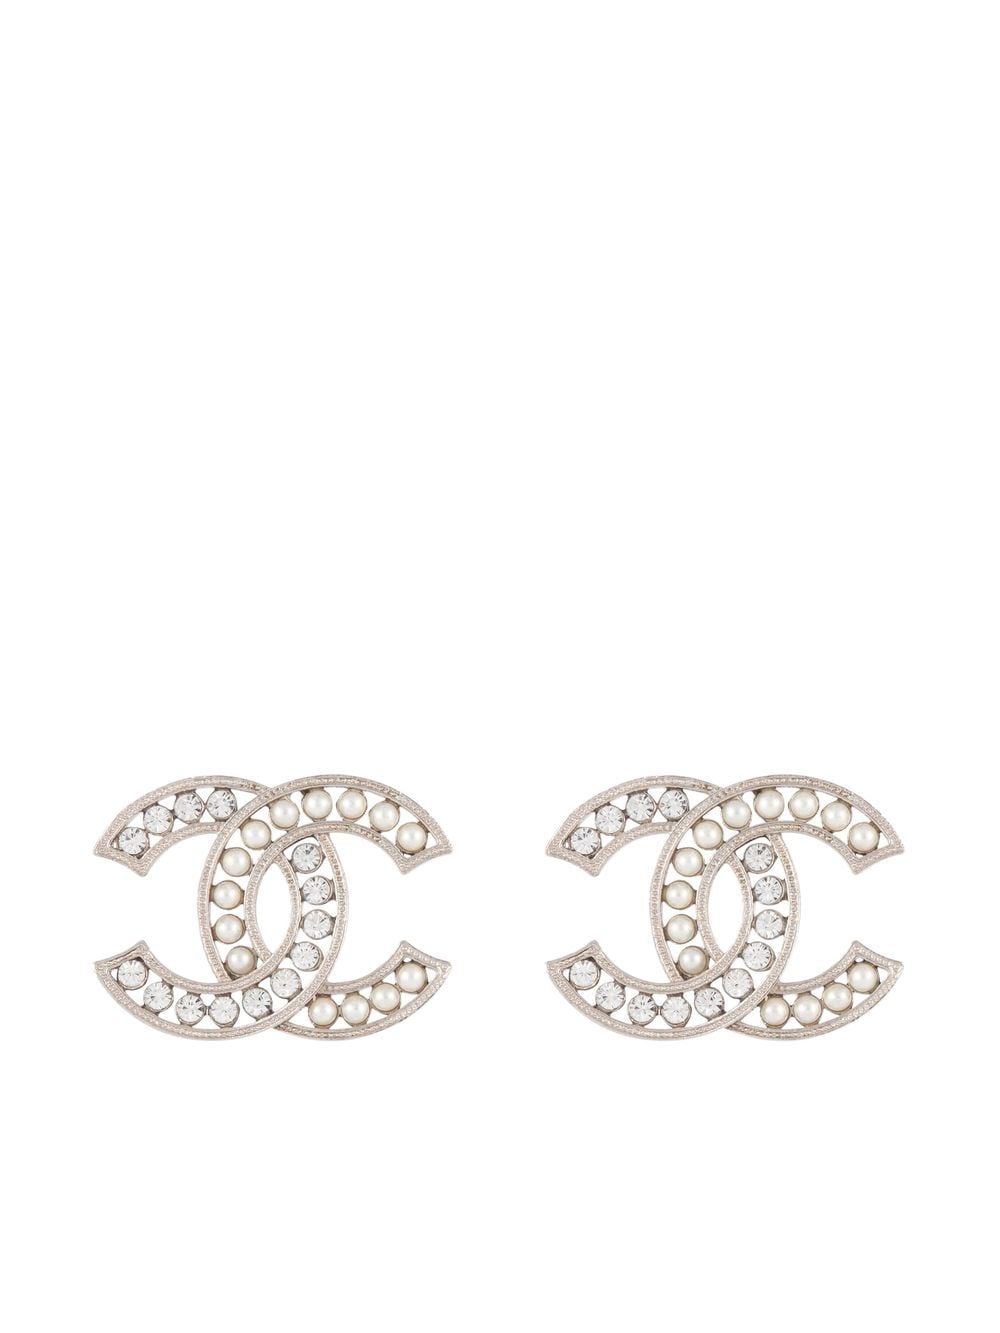 The Most Collectible Chanel Earrings, Handbags and Accessories